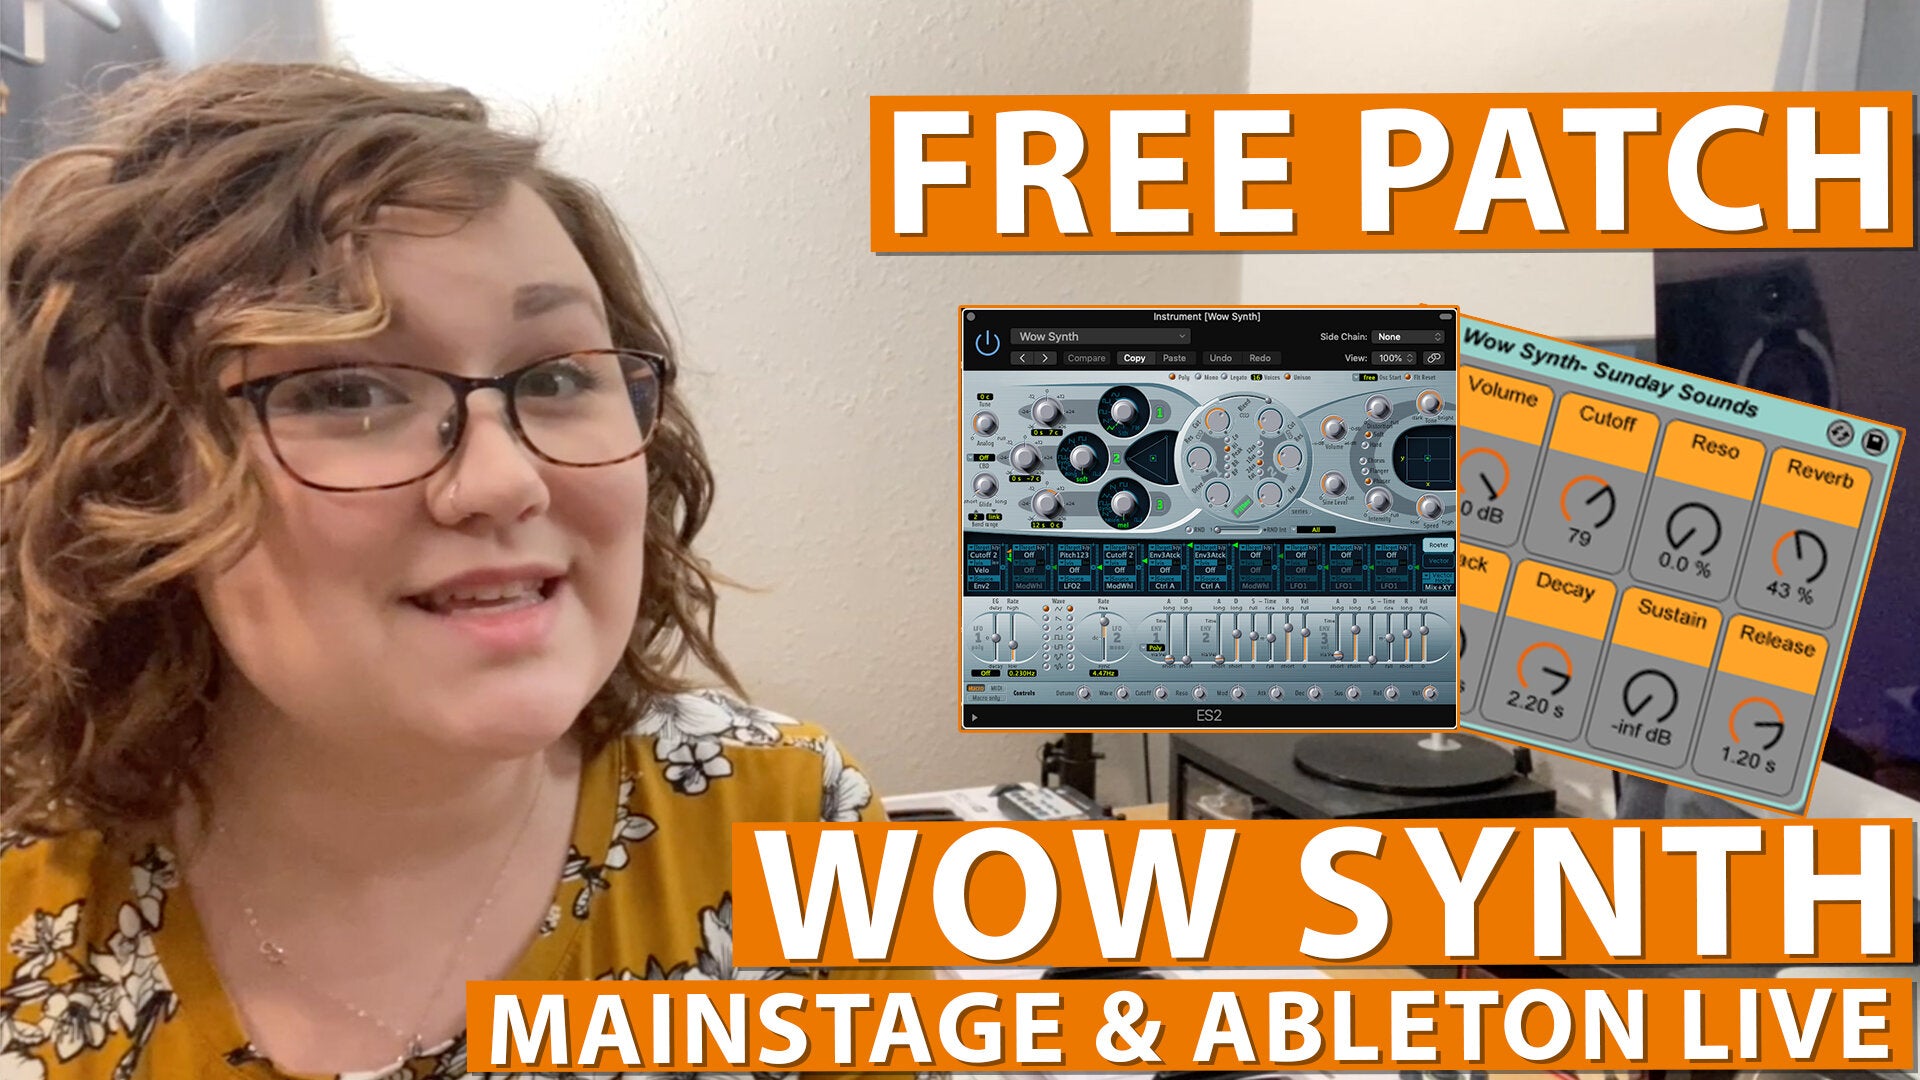 Free MainStage & Ableton Worship Patch! - Wow Synth